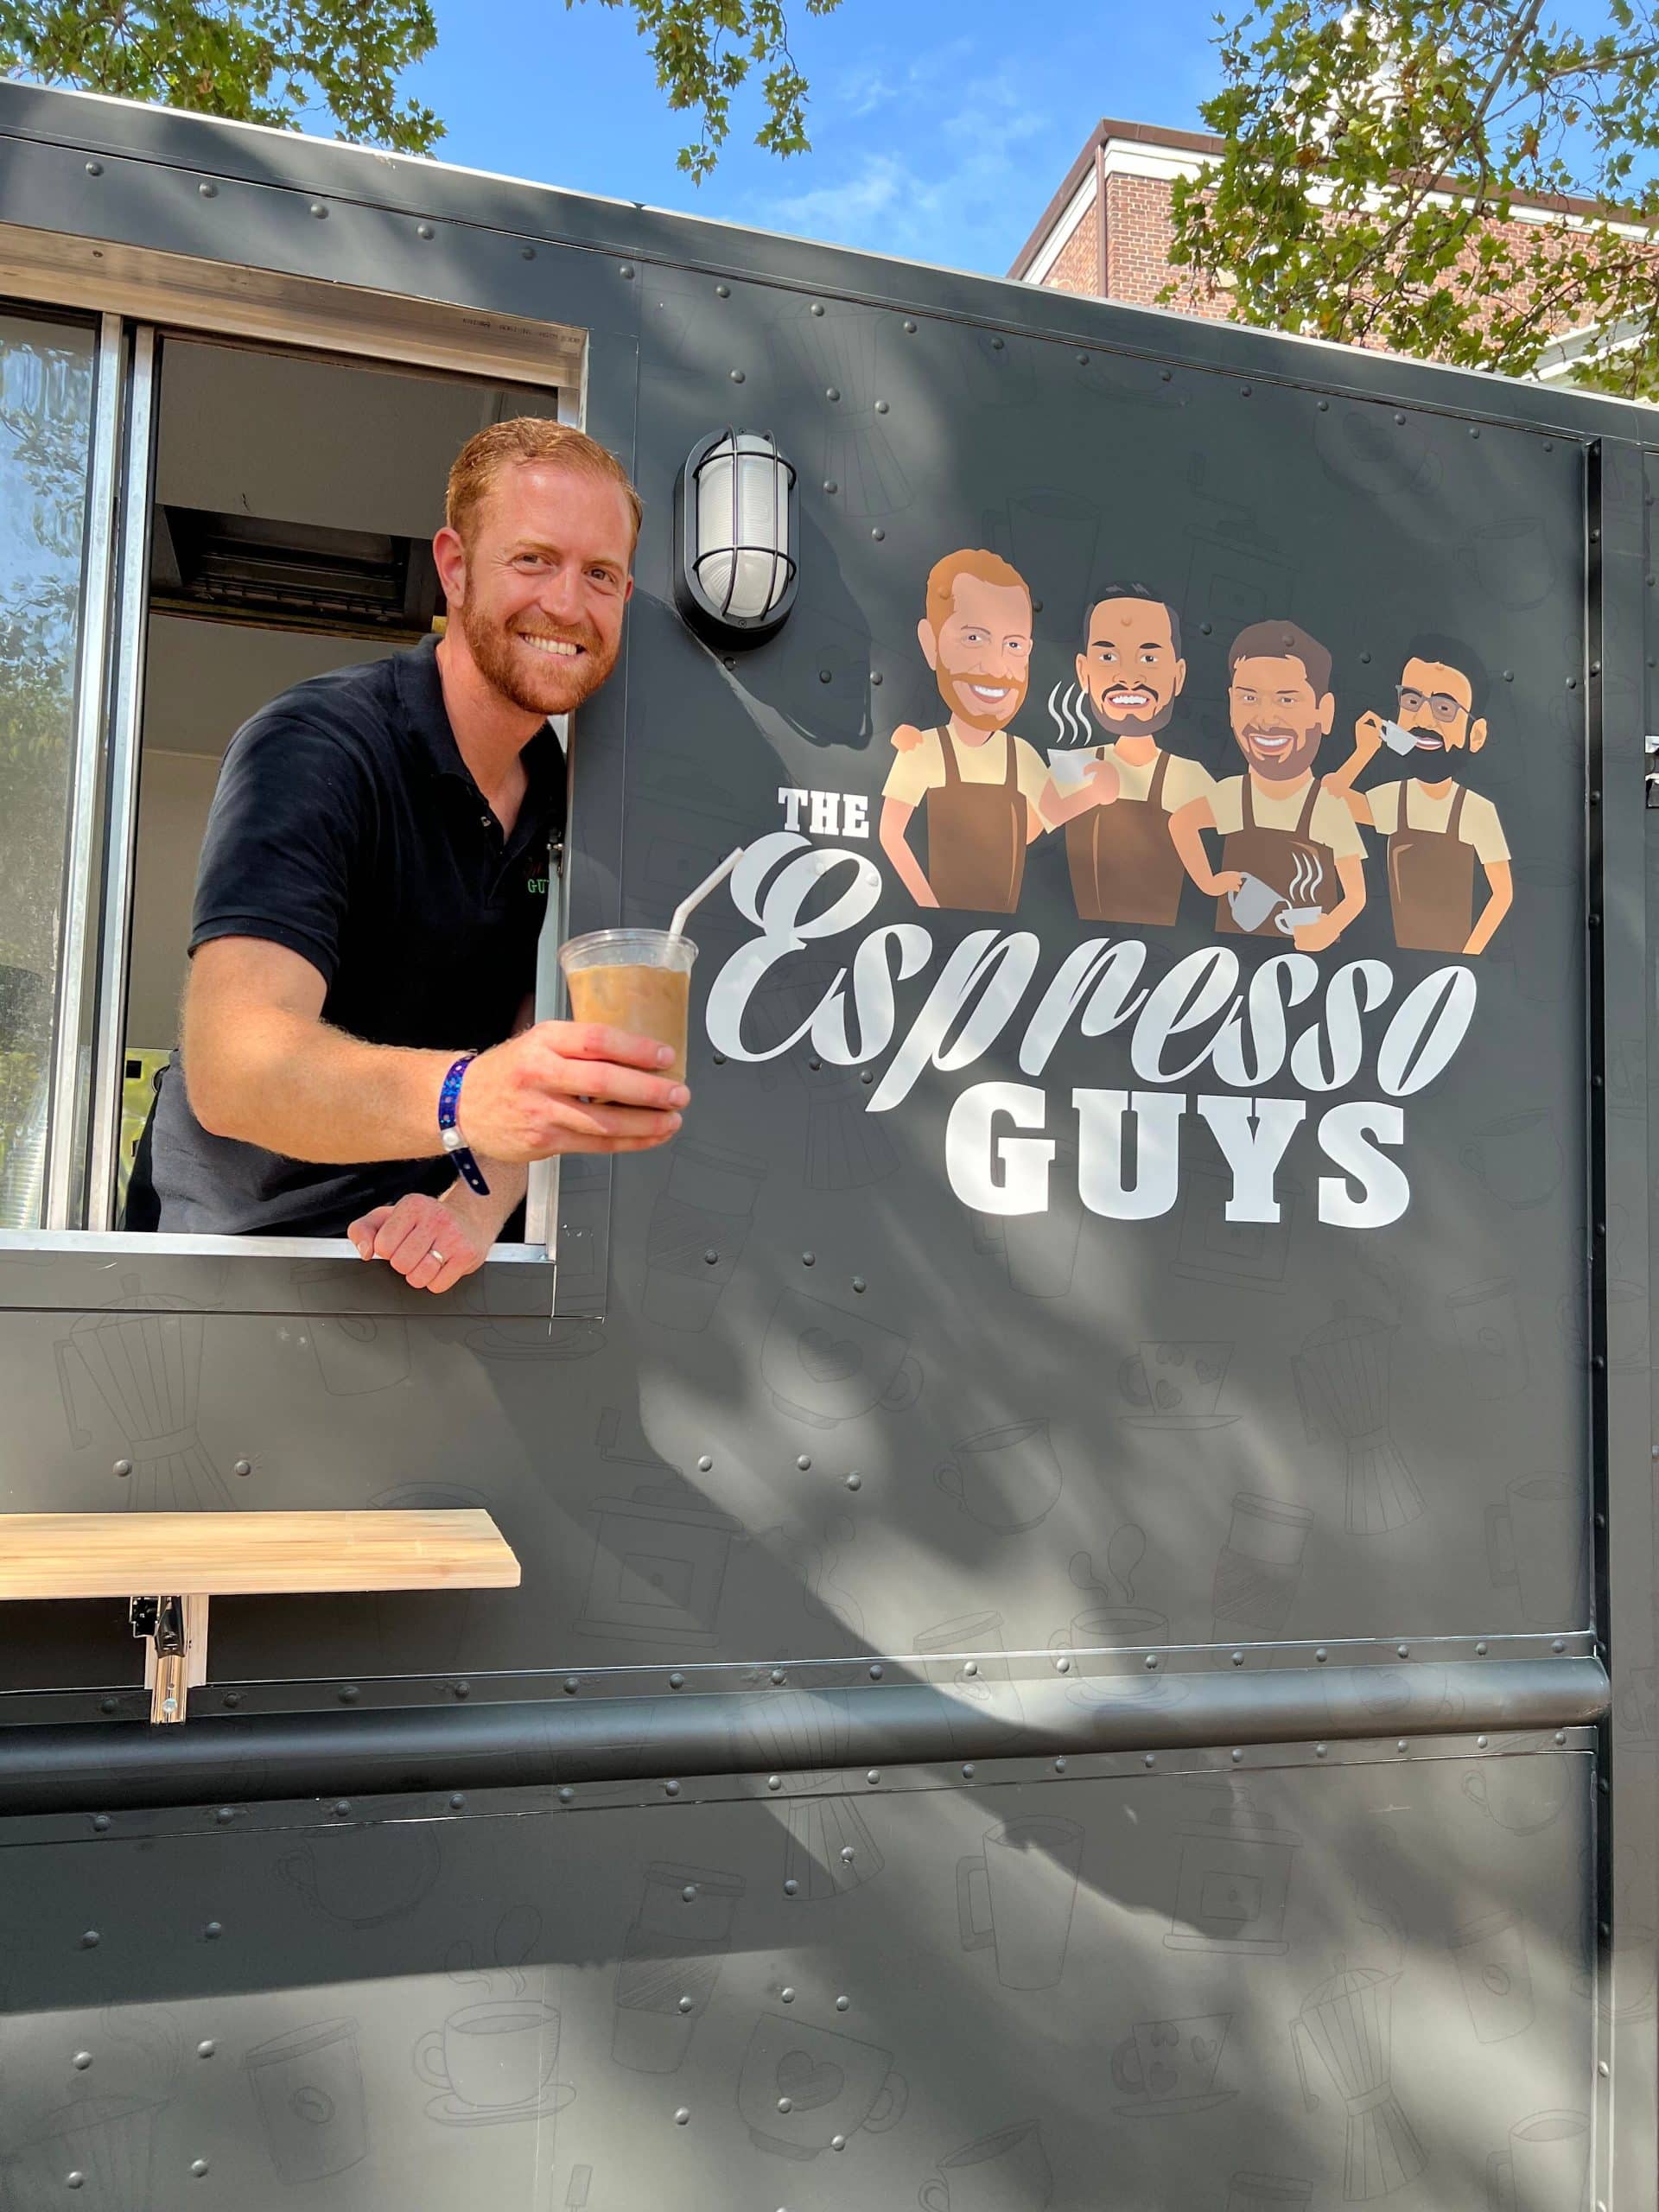 Espresso guys food truck owner holding coffee from food truck window